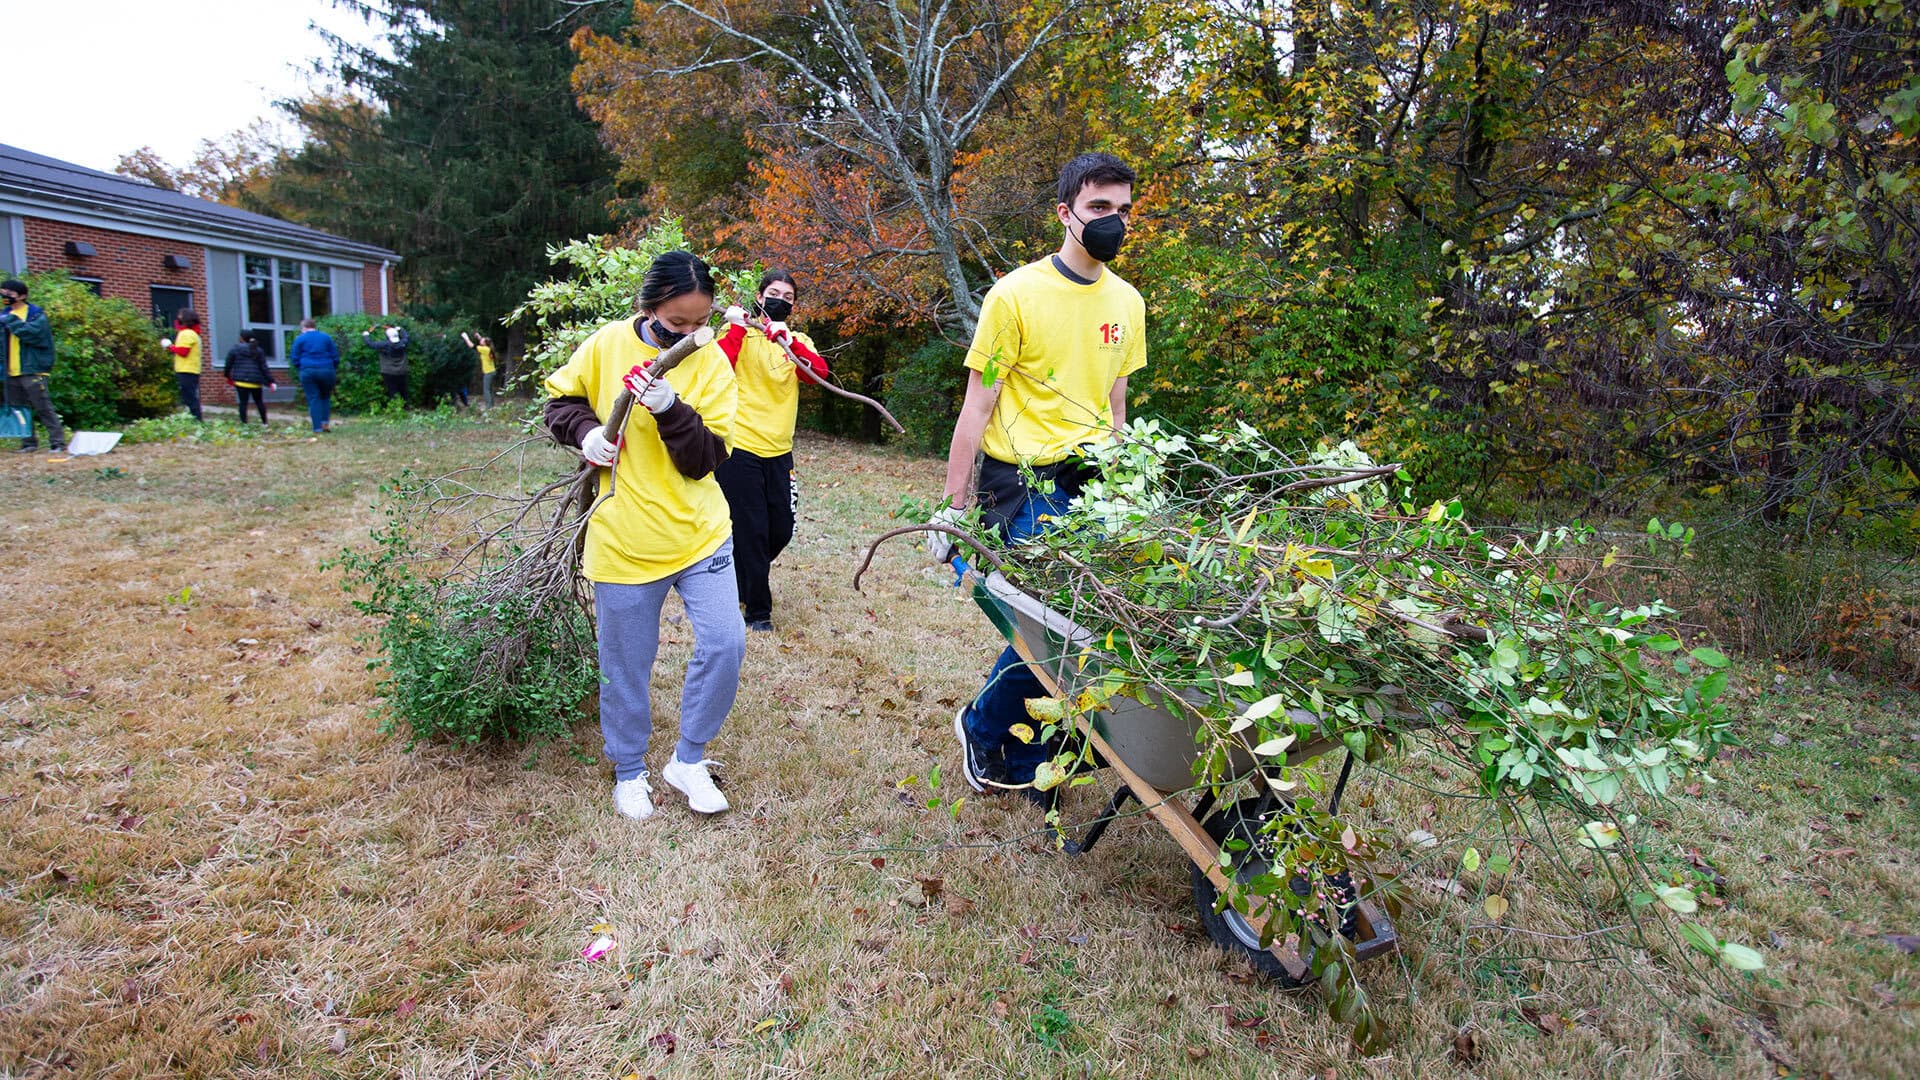 Three students clear brush at a school on Good Neighbror Day